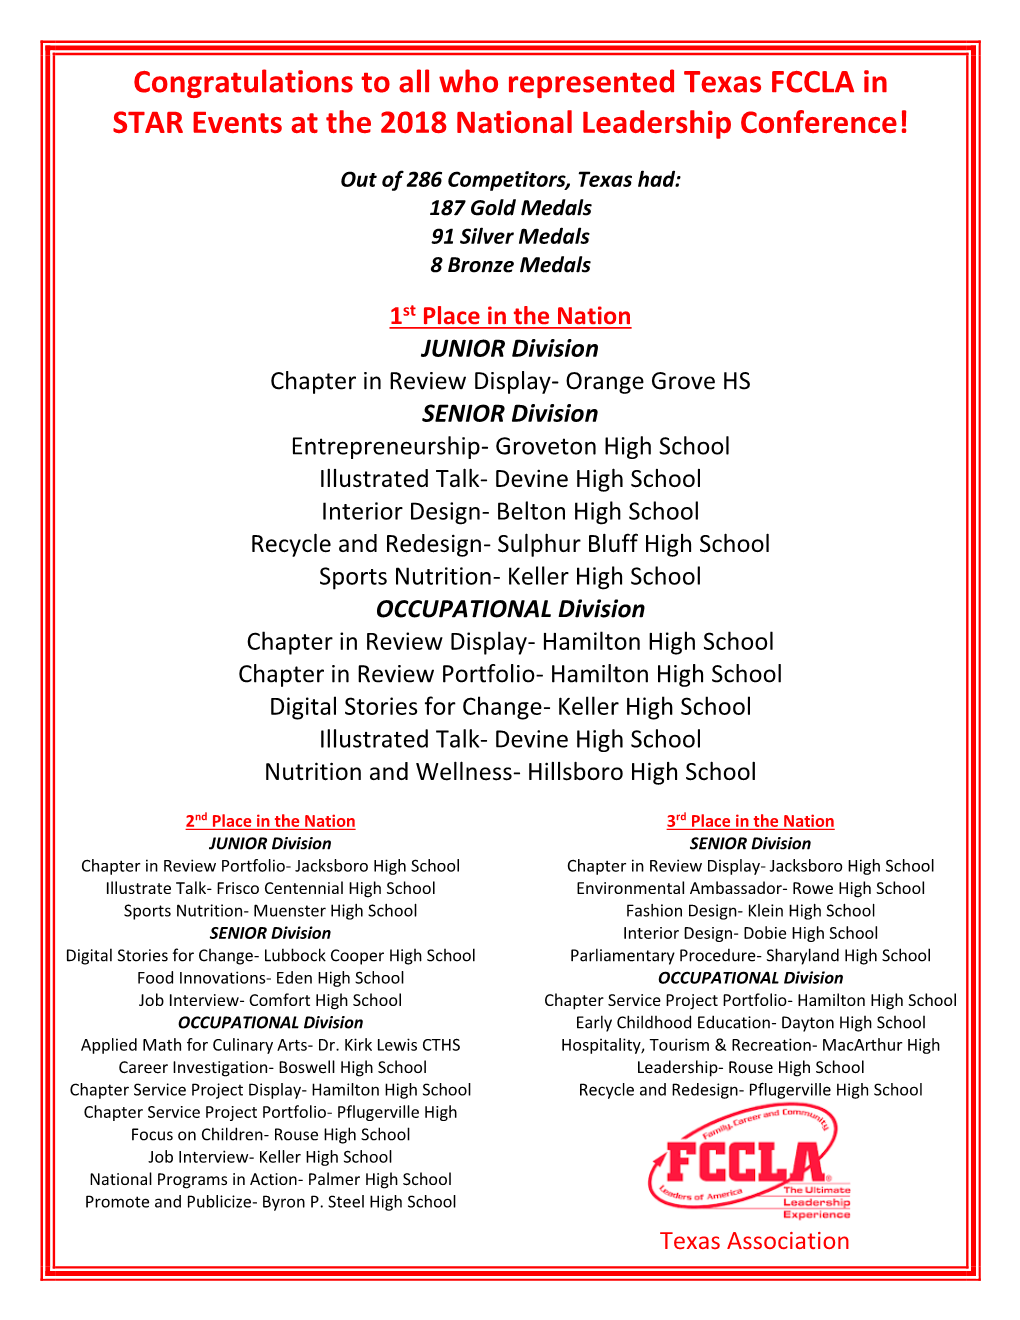 Congratulations to All Who Represented Texas FCCLA in STAR Events at the 2018 National Leadership Conference!